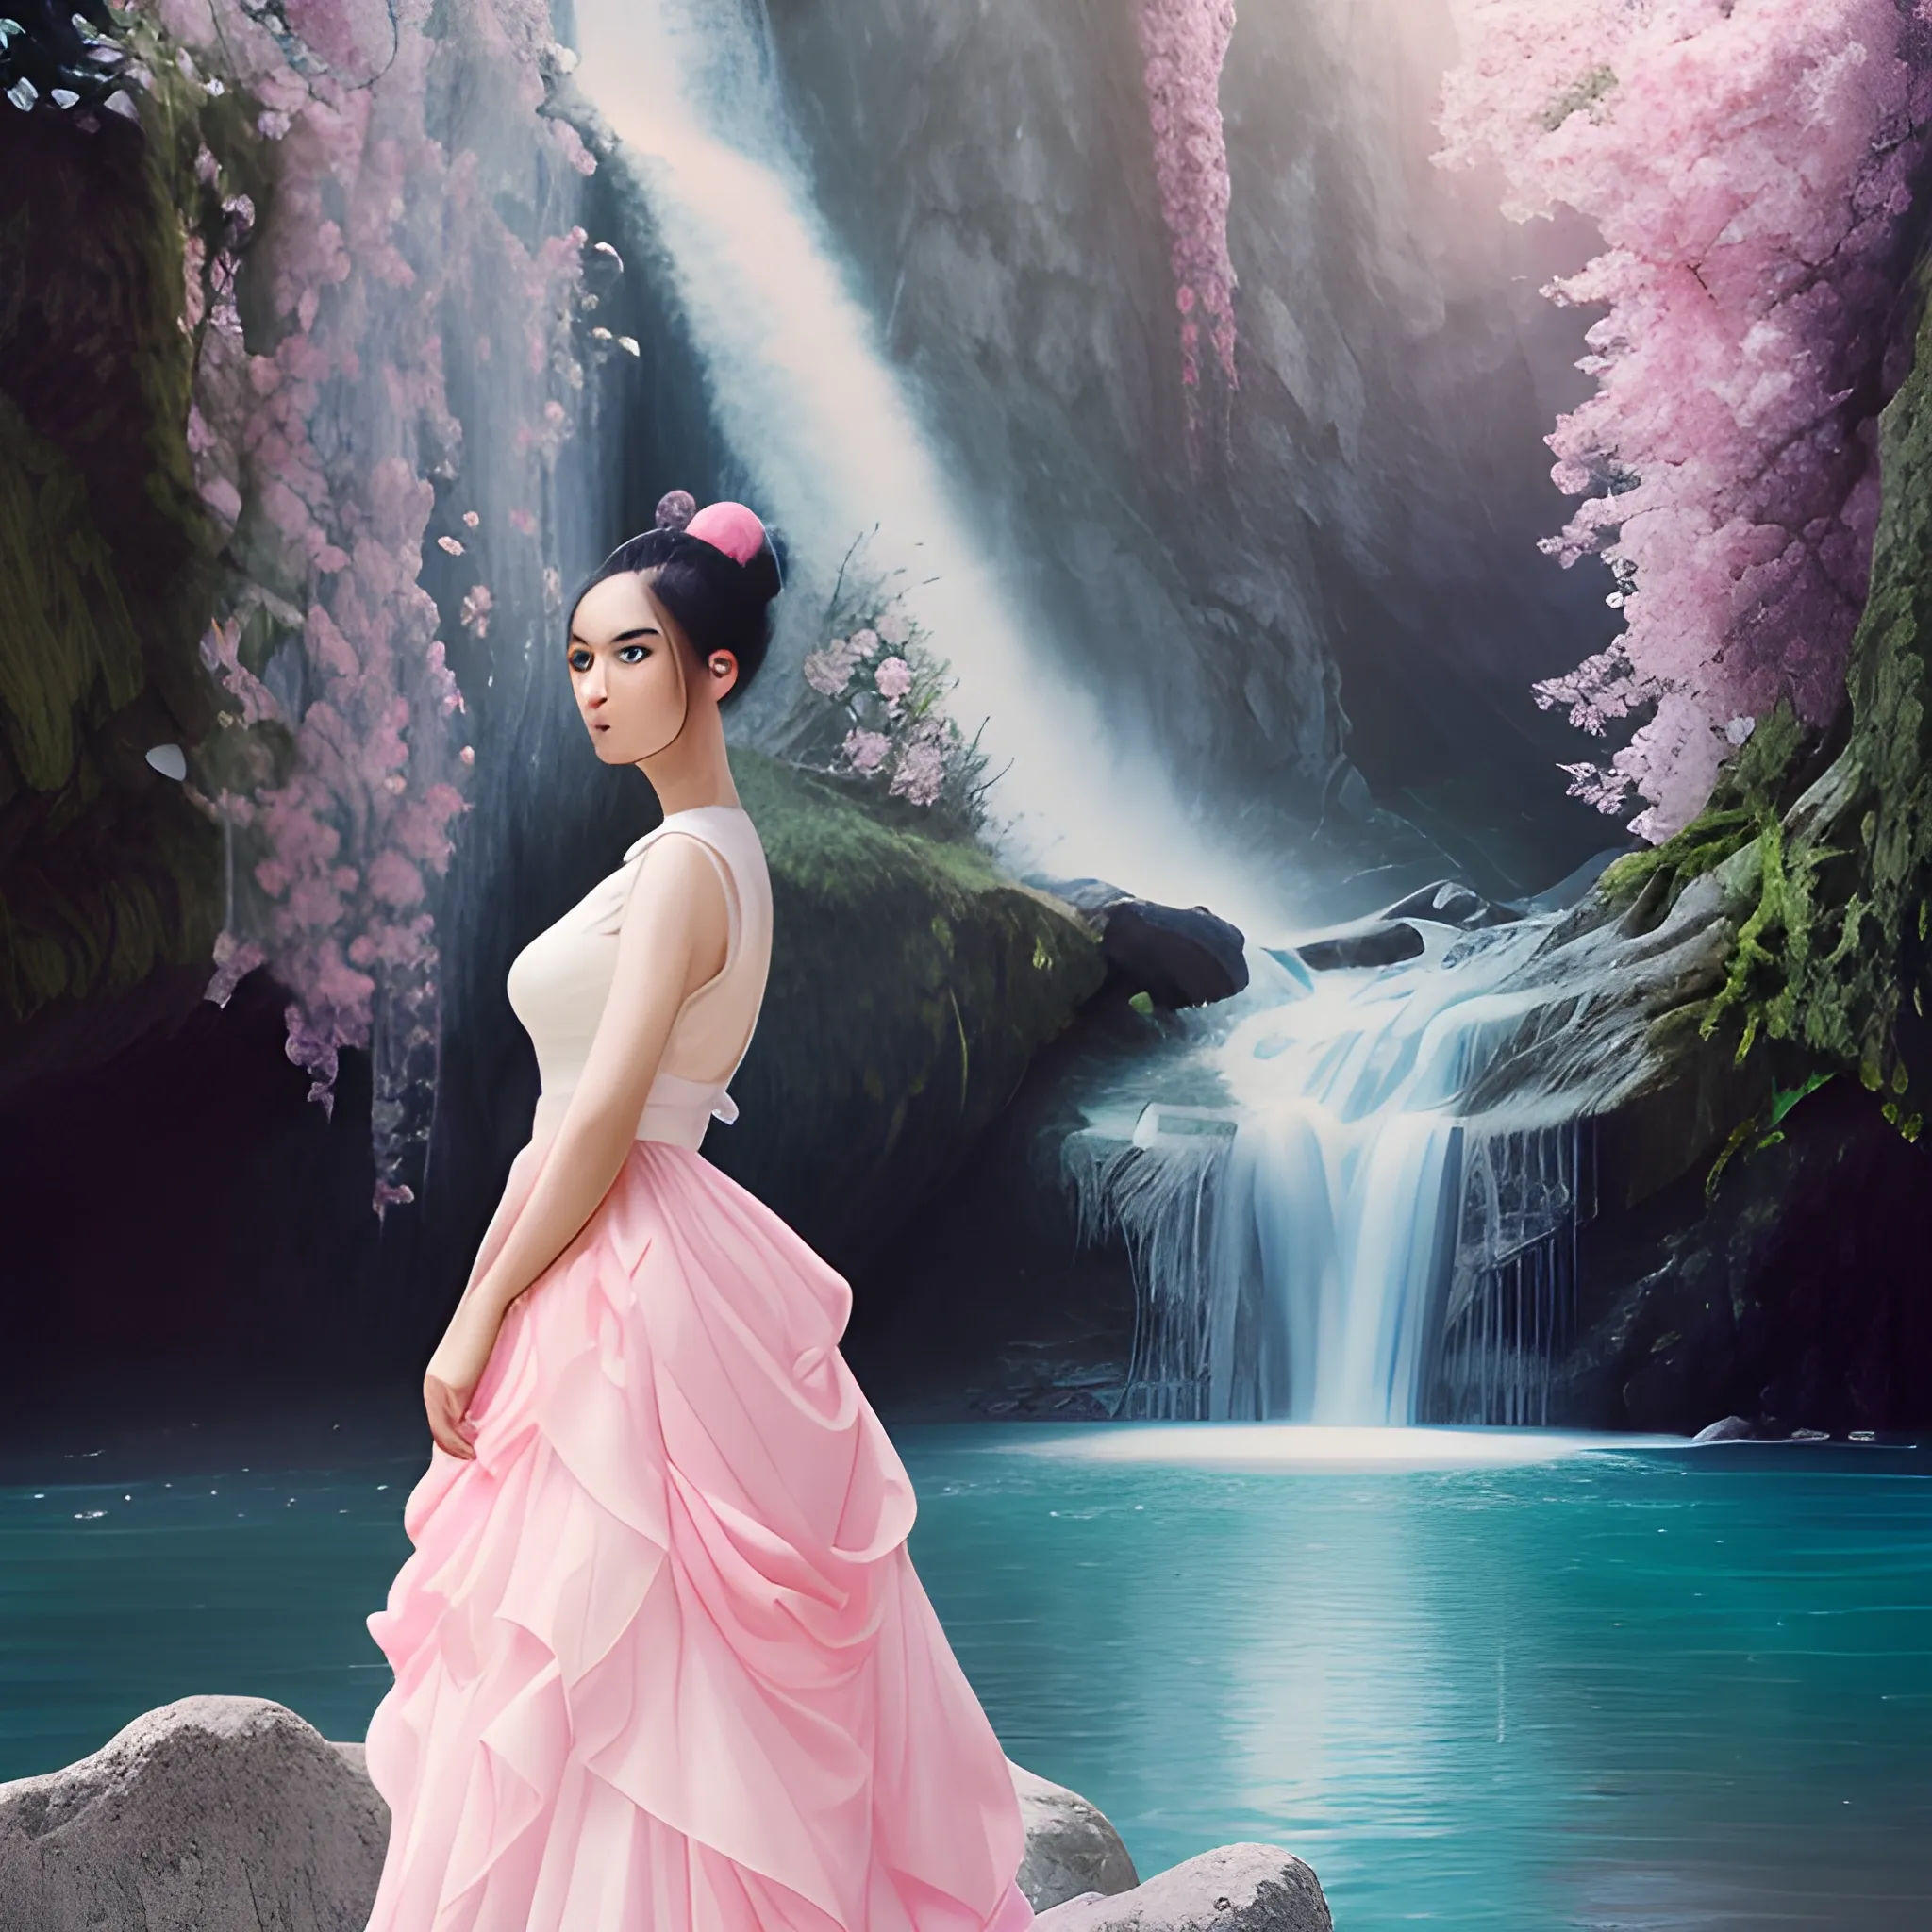 Very beautiful woman, black hair, bun hair, white dress, standing on big stone, pink roses, light blue and pink, romanticism, high detail, 8K resolution, ultra high definition picture, waterfall background